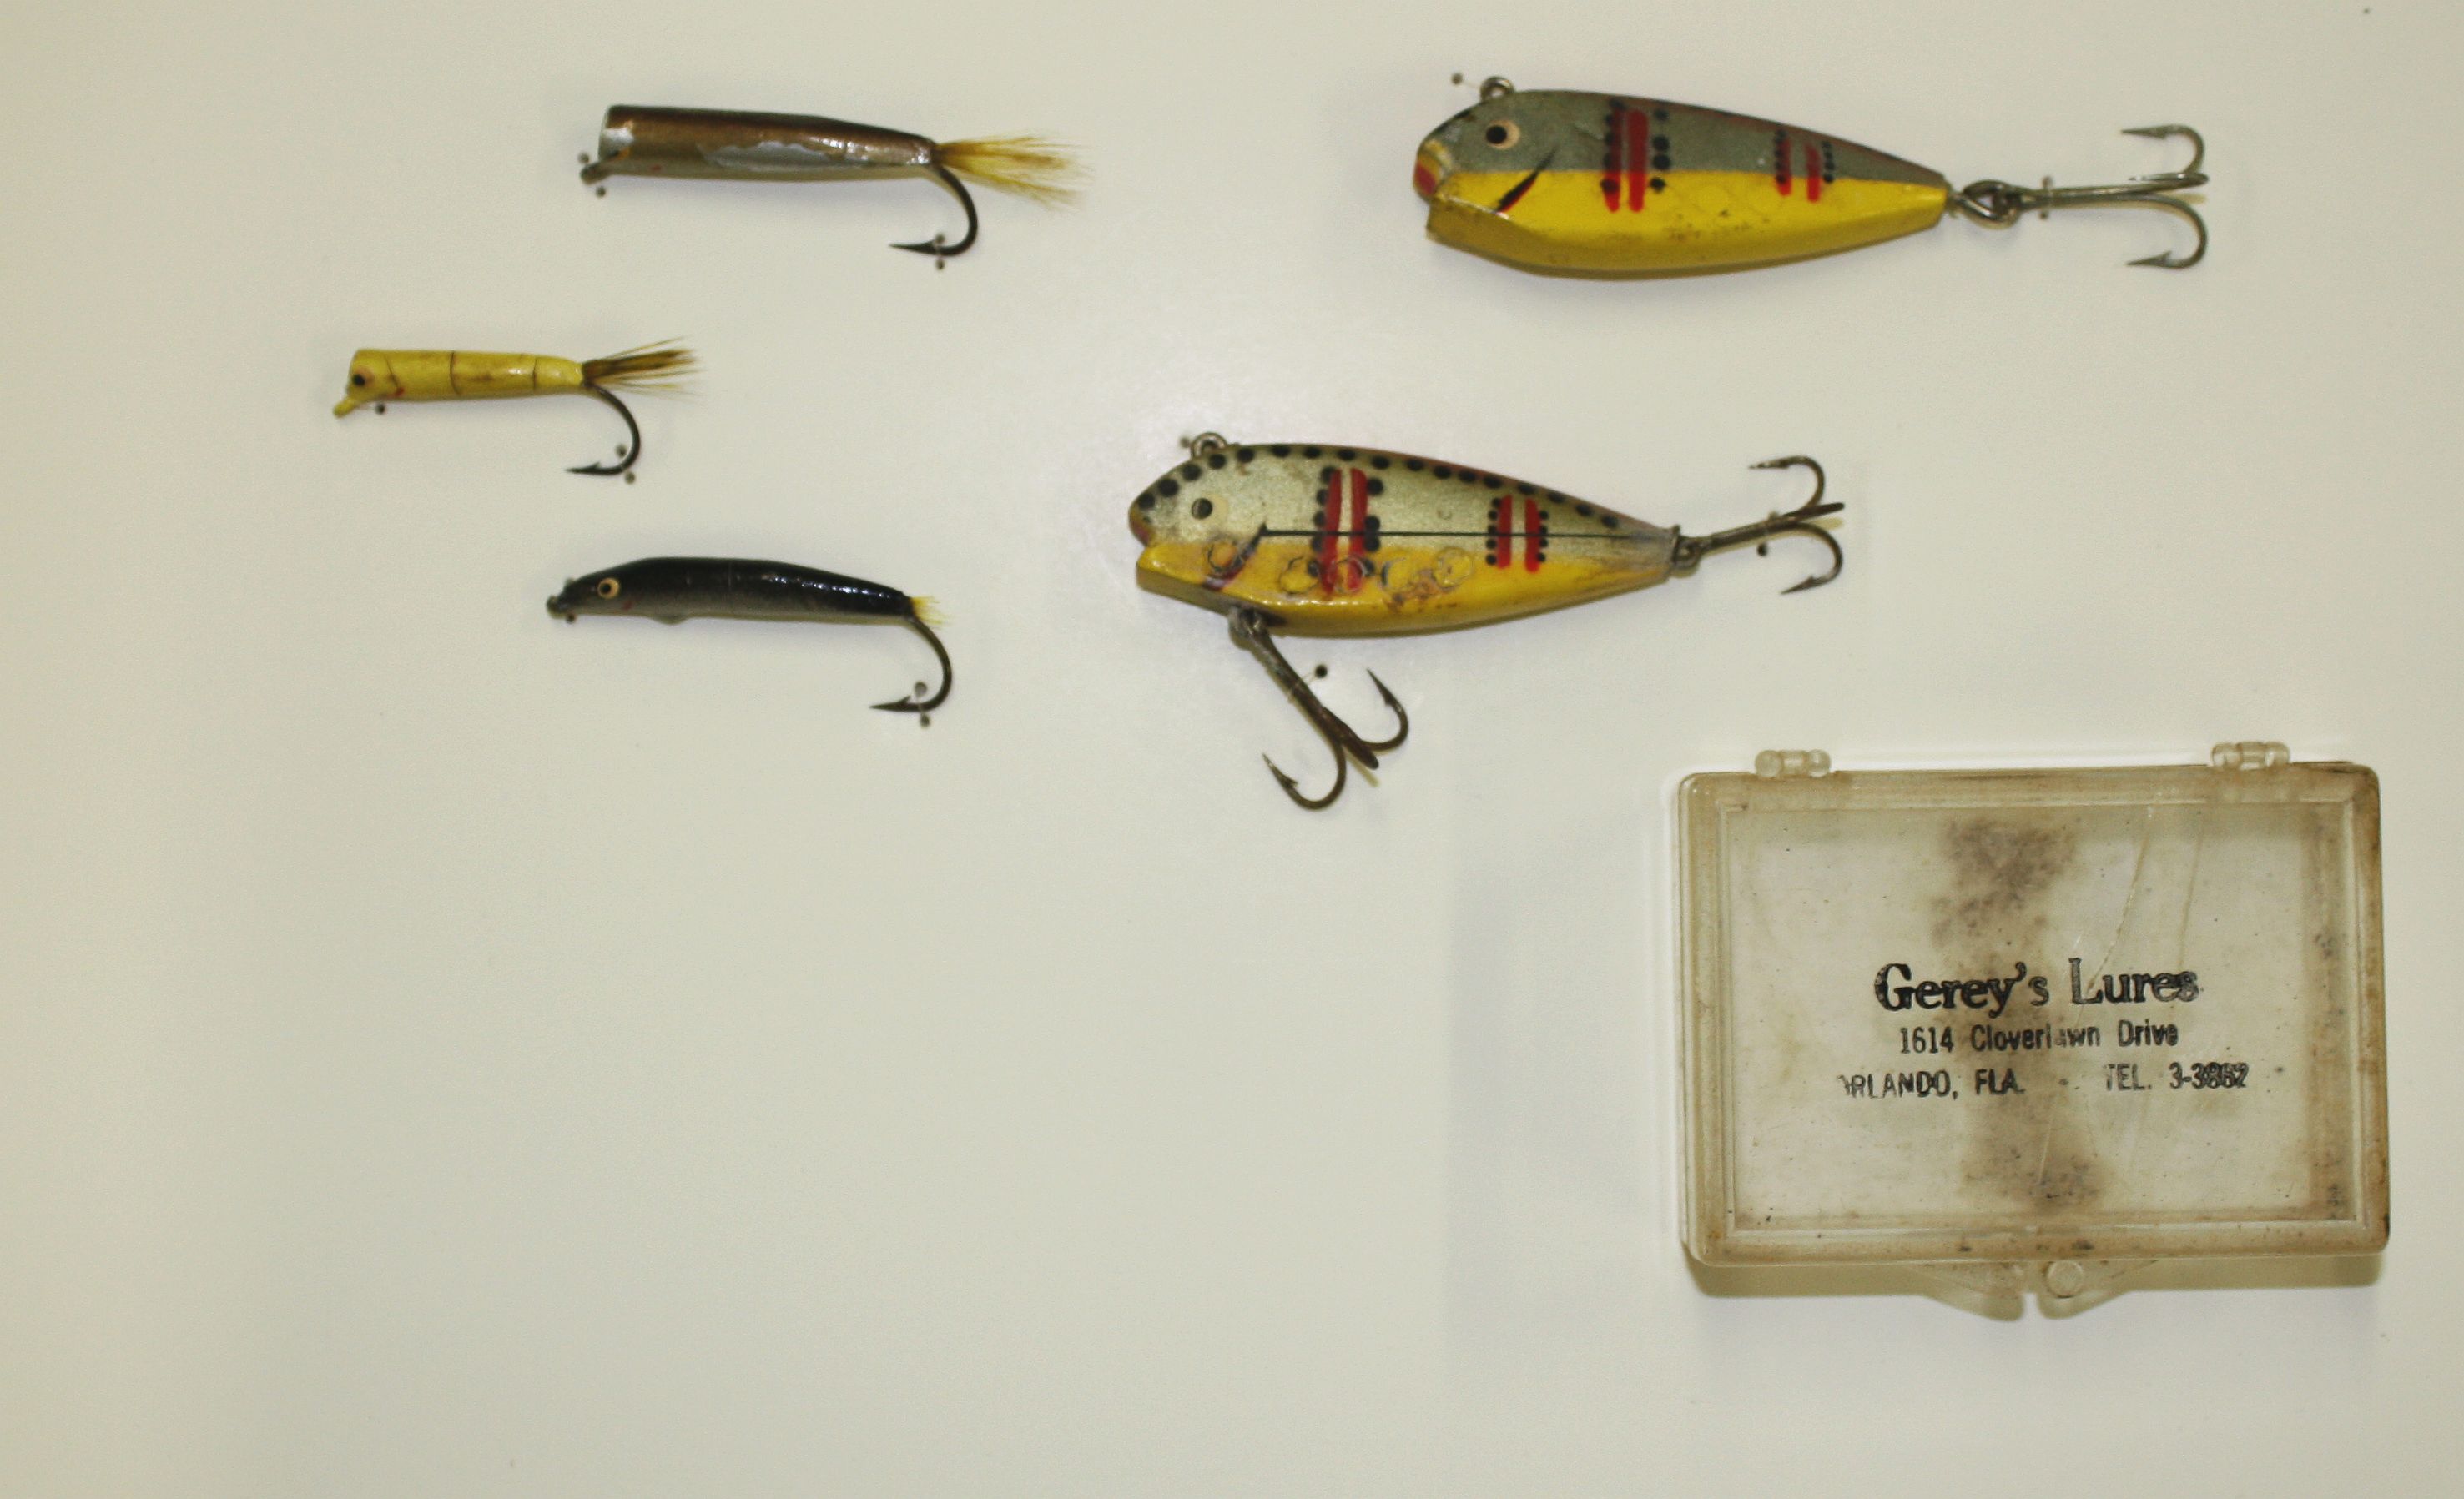 3 Lure Lot.Unknown Mike the Fisherman Bait Chamber Group.1960 Modesto  California 海外 即決 - スキル、知識